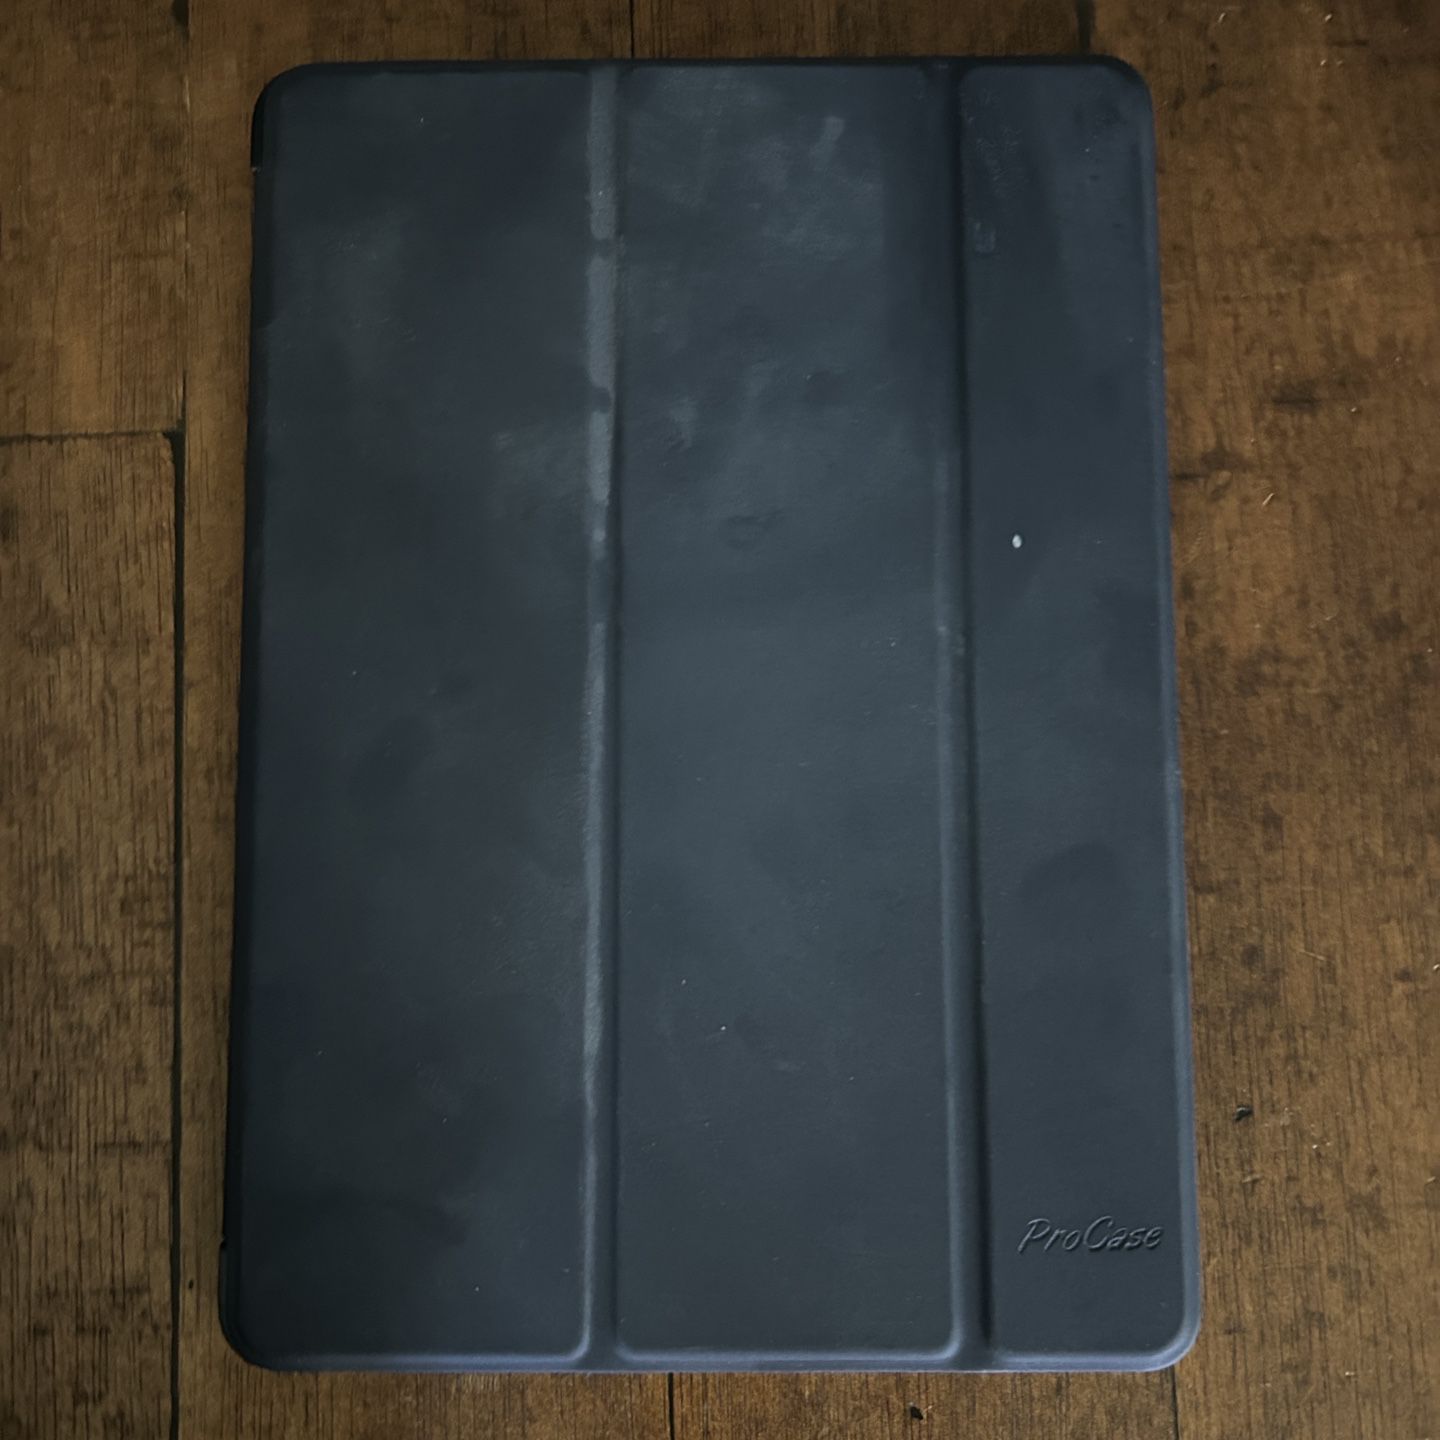 iPad Air WiFi Plus Cellular With Case